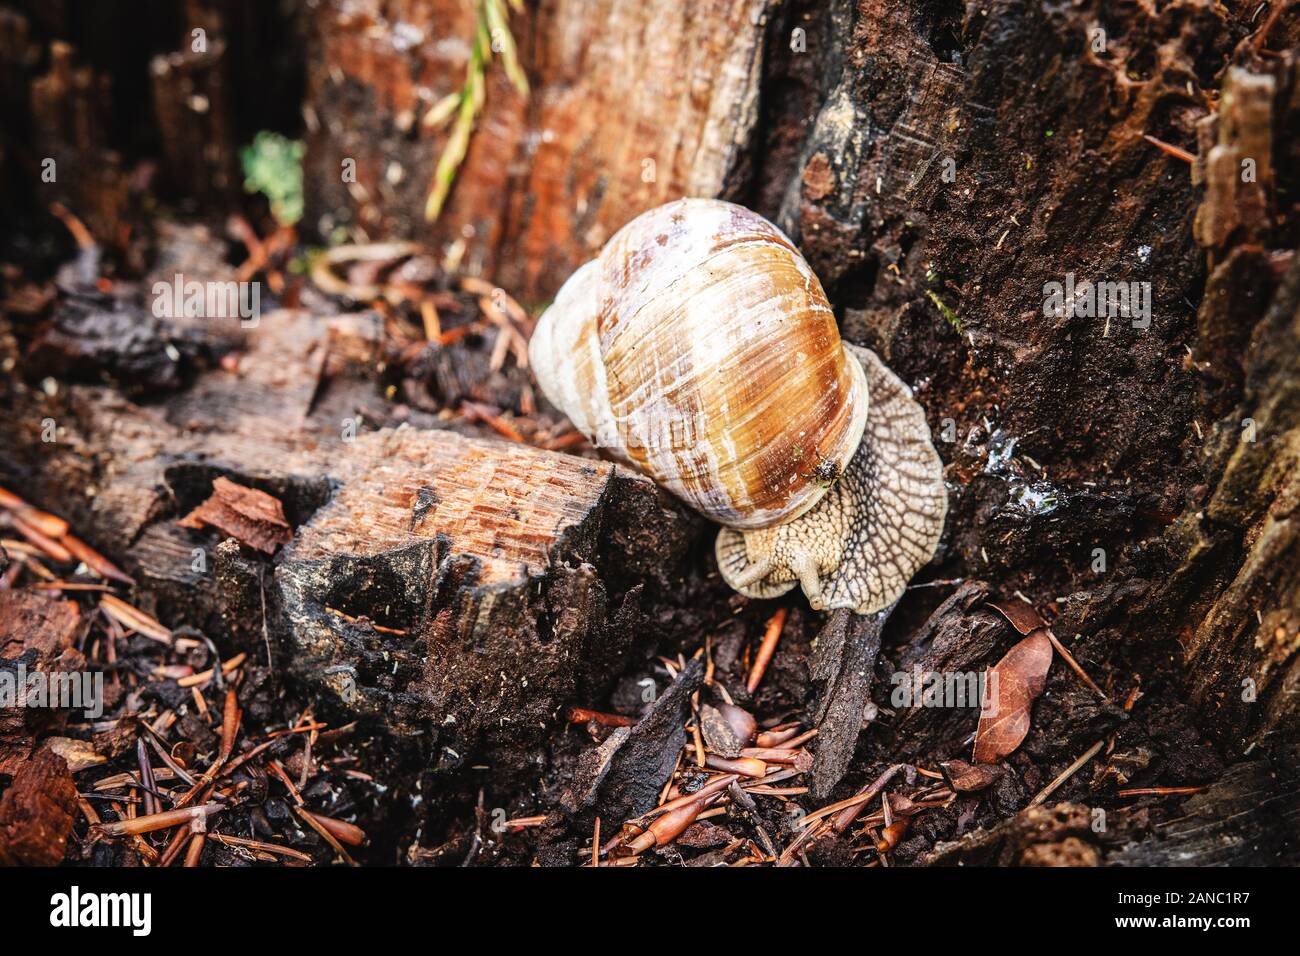 Snail in Shell Crawling on Tree Bark on Summer Day in Forest Stock Photo